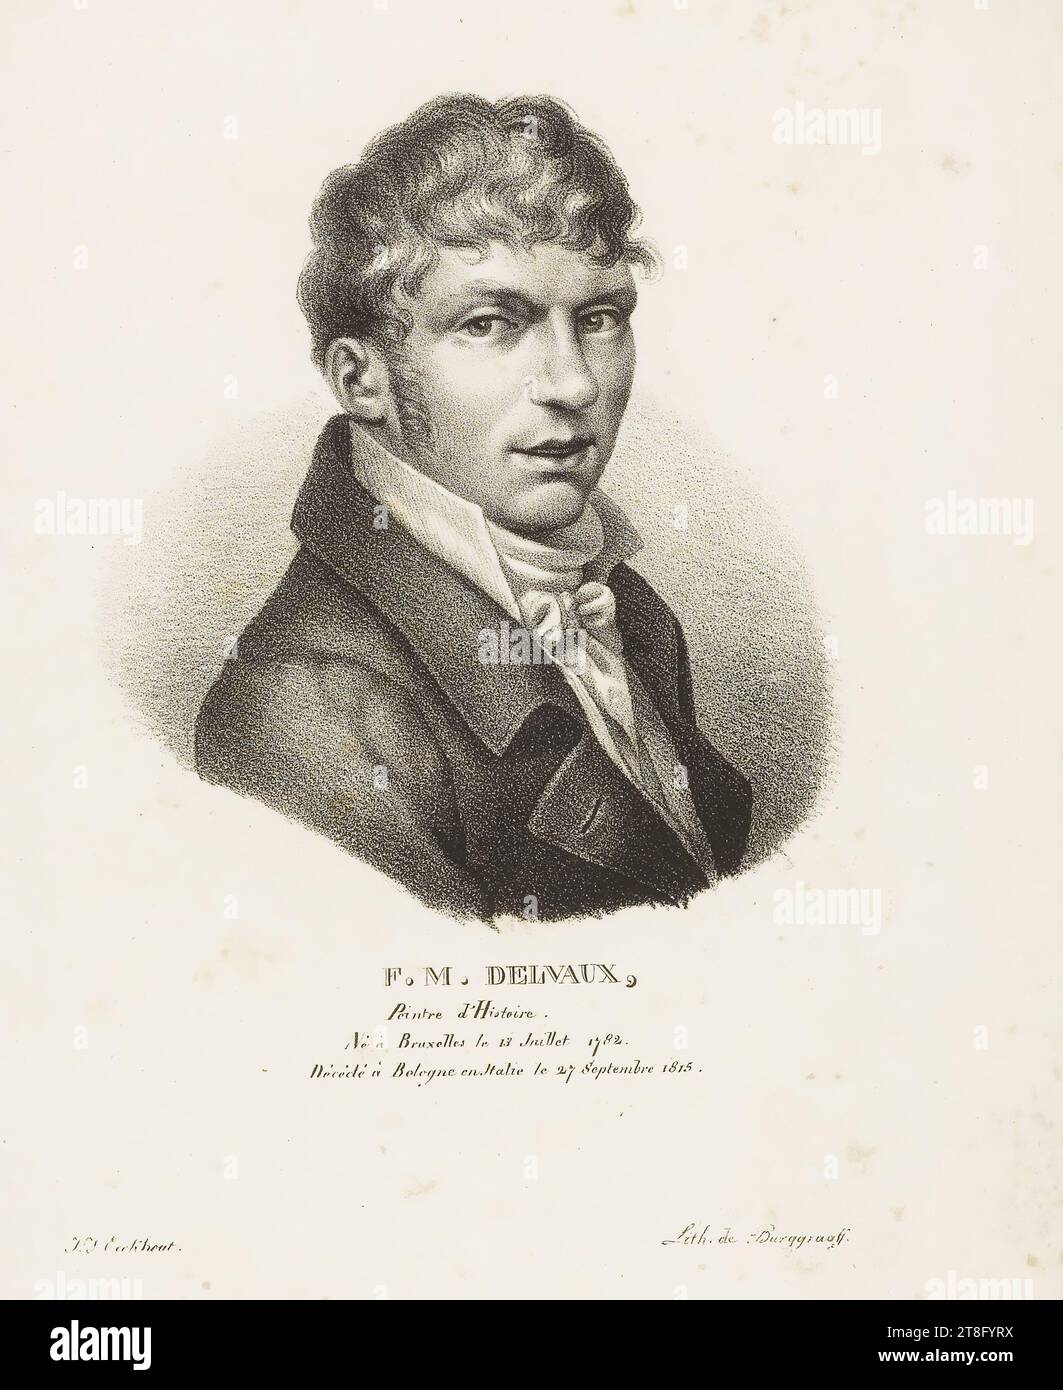 F.M. DELVAUX, History Painter, Born in Brussels on July 13, 1782., Died in Bologna in Italy on September 27, 1815. J.J. Eechhout. Lithog. from Burggraaf. illustration from: Collection of portraits of modern artists, born in the Kingdom of the Netherlands, drawn from nature by J. J. Eeckhout, and lithographed by G. P. Van den Burggraaff. Brussels 1822 Stock Photo